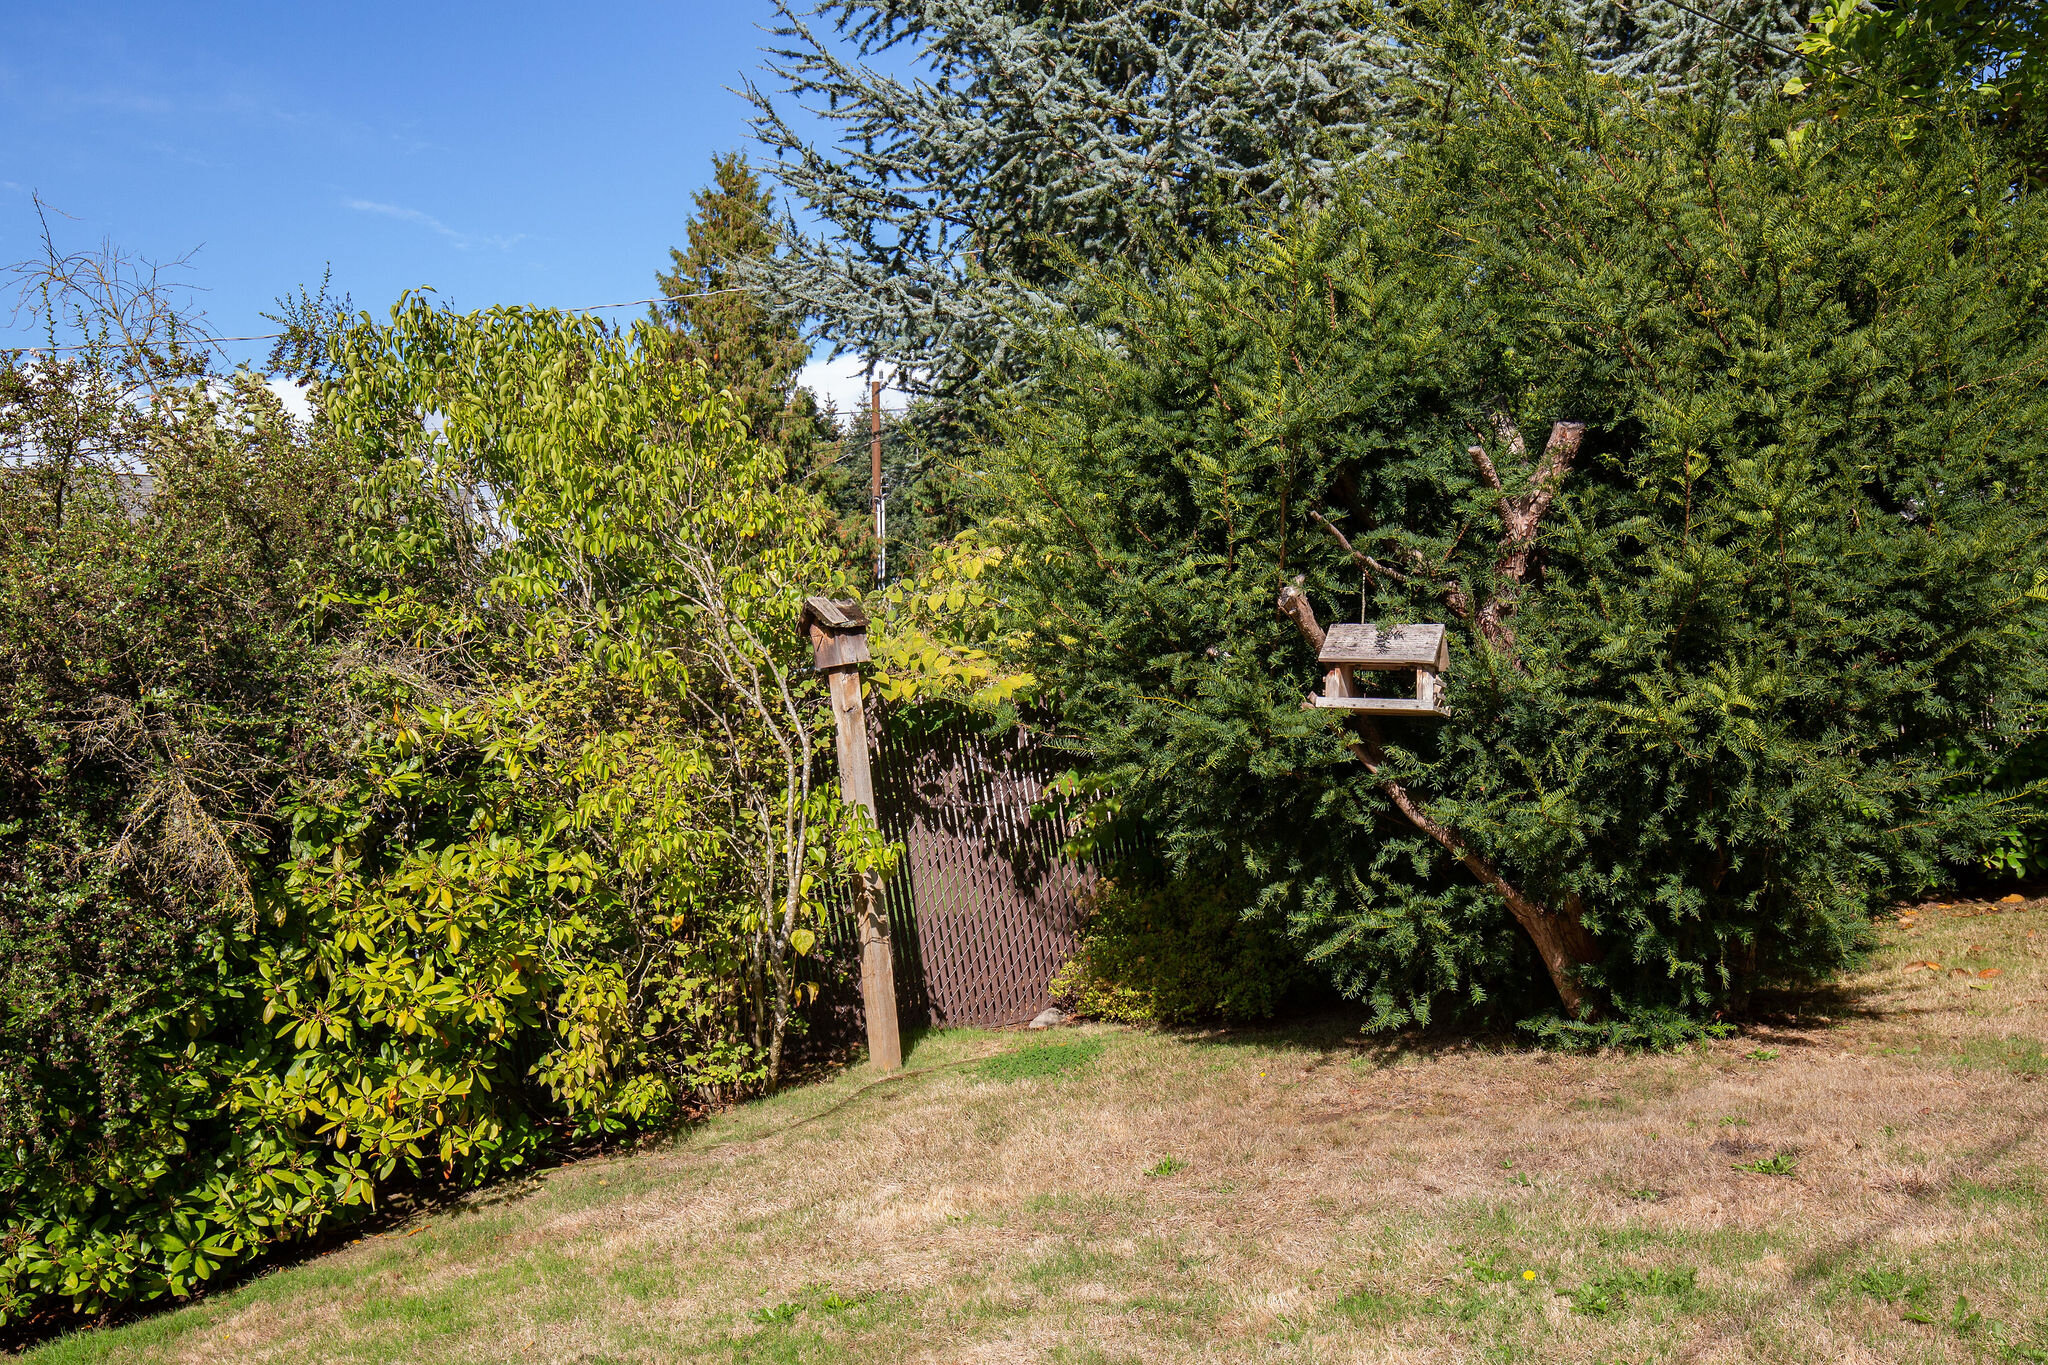  This home has had one owner for 30 years so there are lovely, mature trees and native plantings around the garden. 